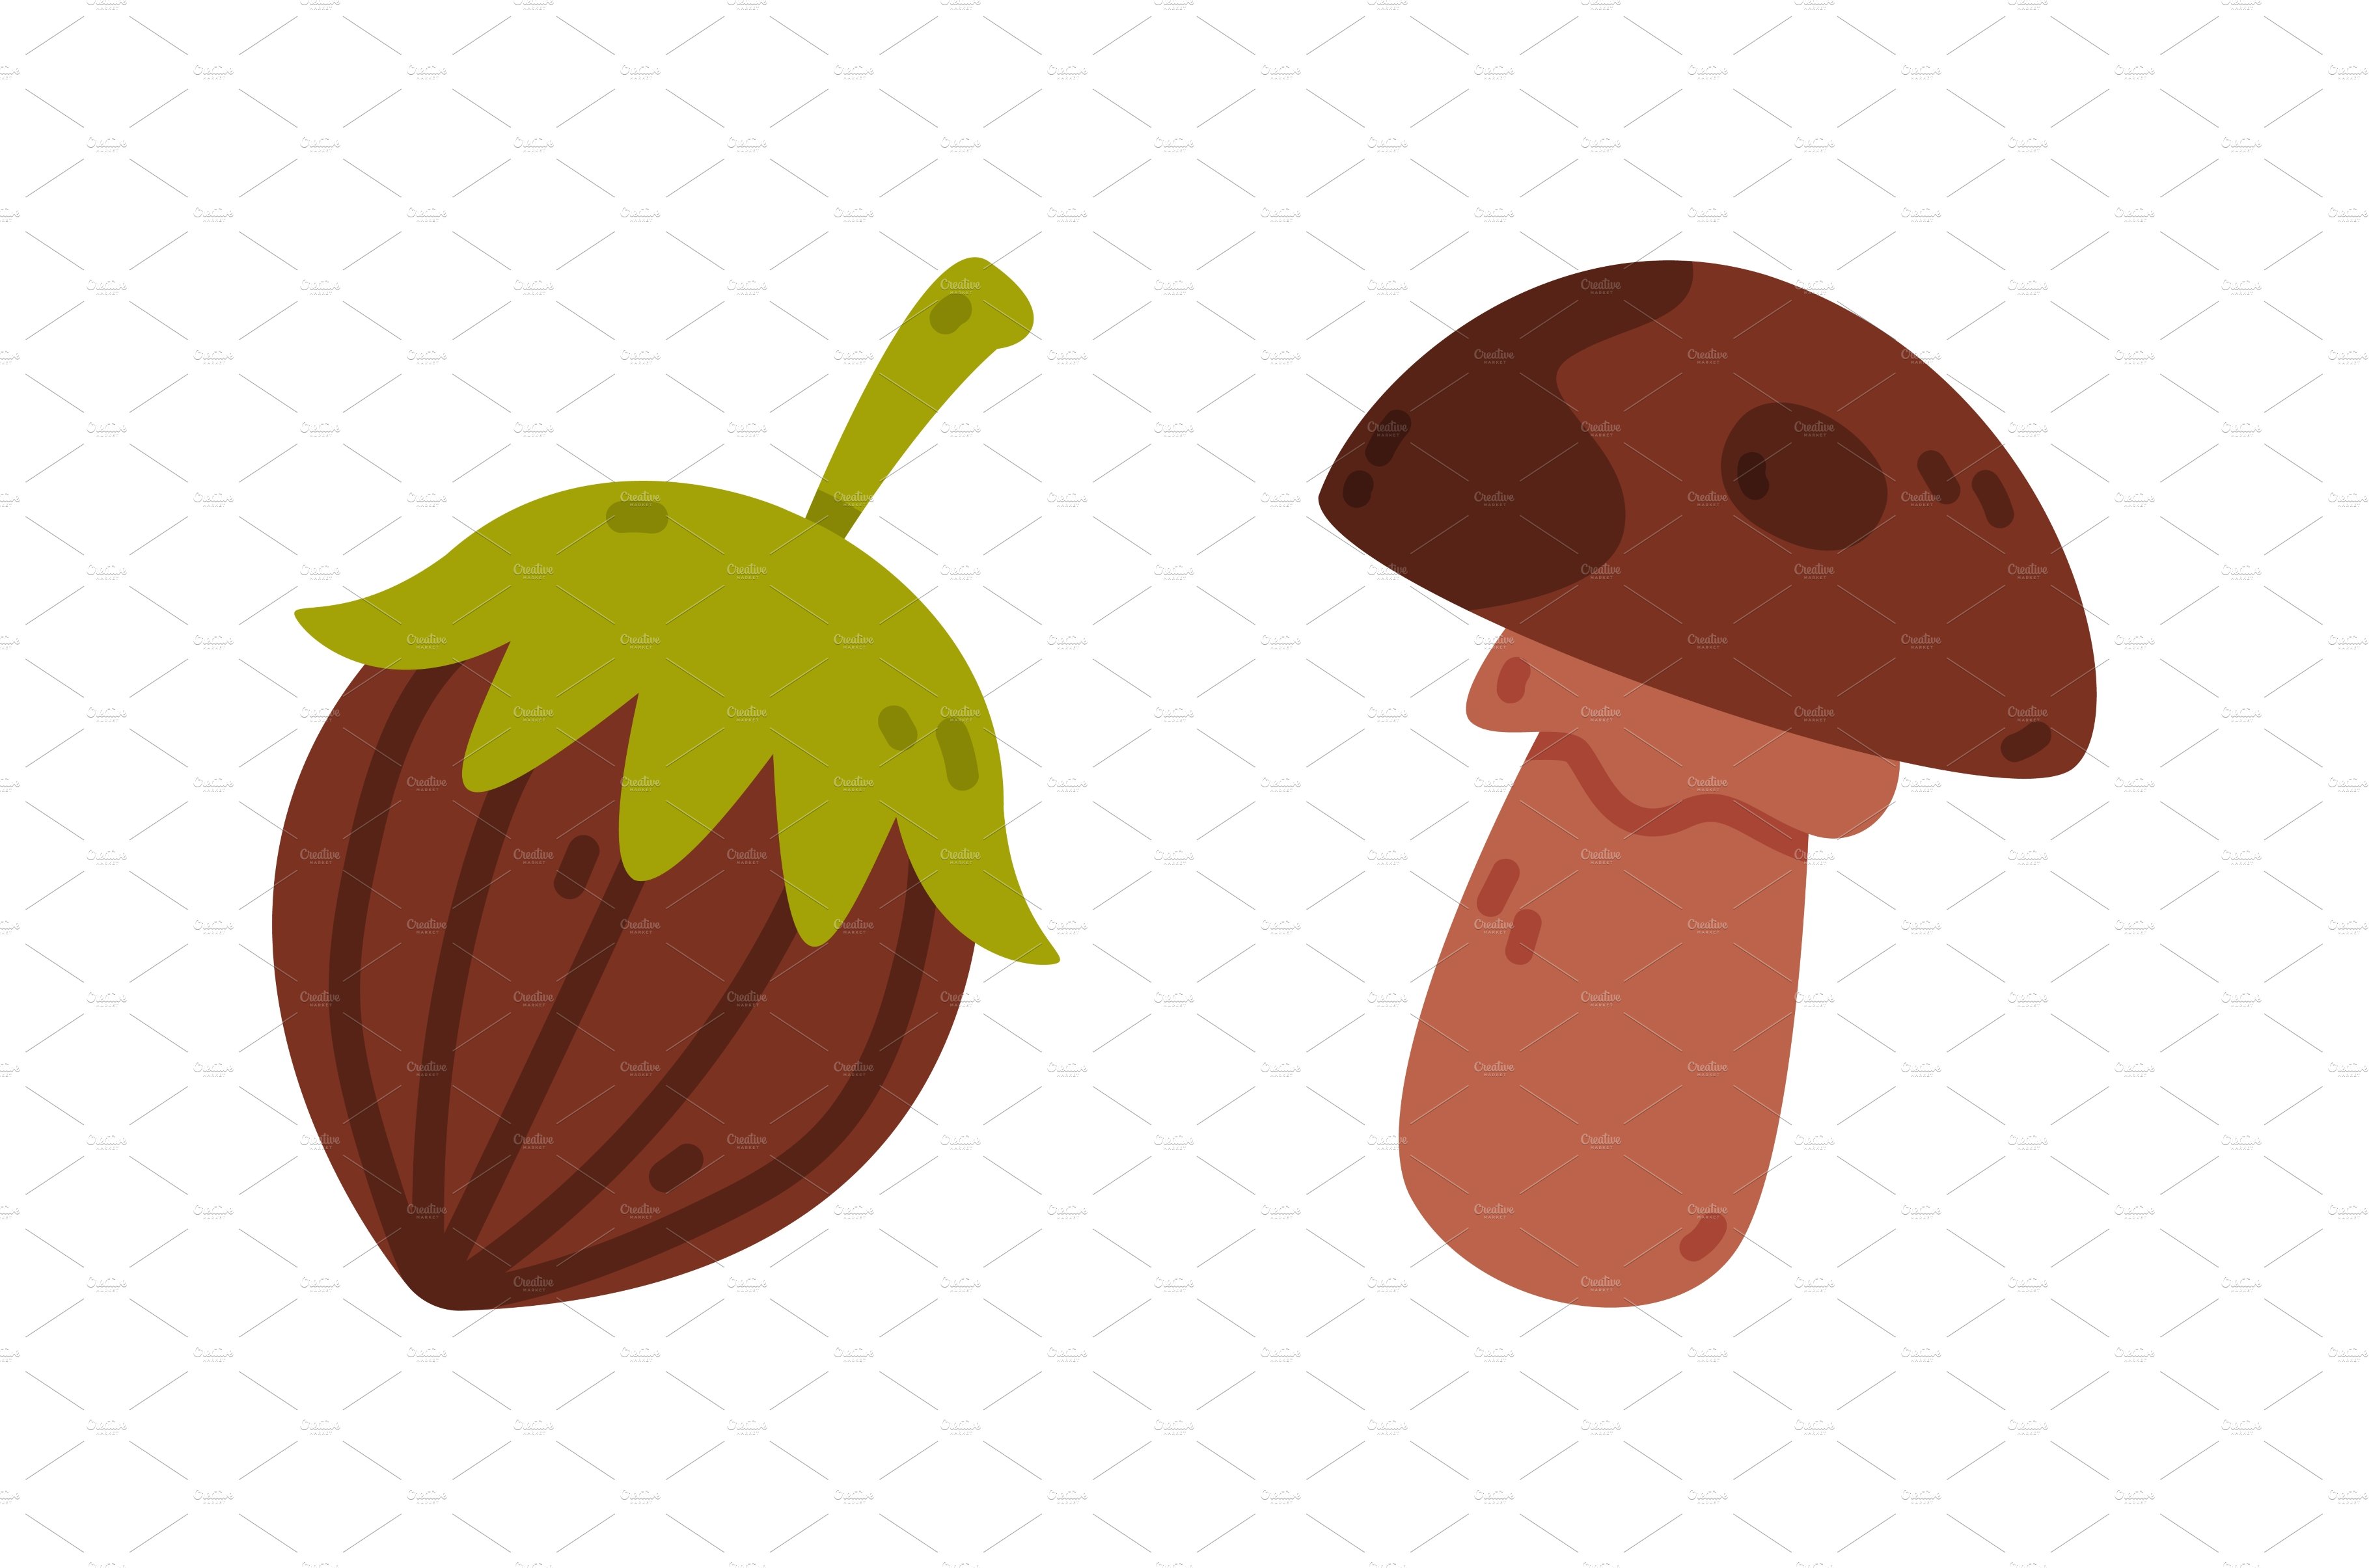 Brown Acorn and Mushroom as Forest cover image.